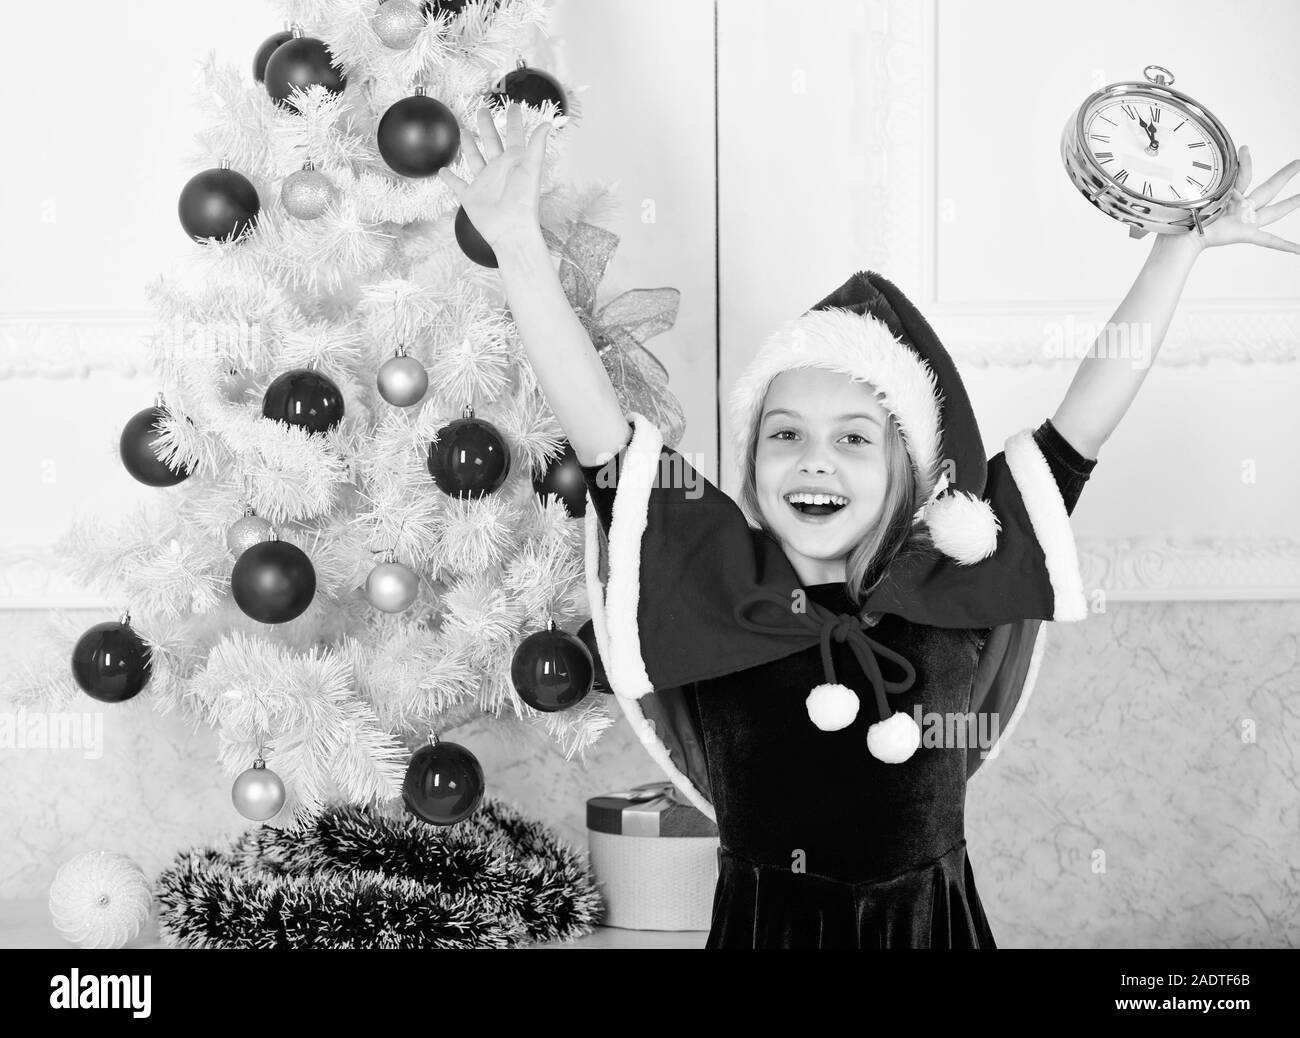 Last minute new years eve plans that are actually lot of fun. New year countdown. Girl kid santa hat costume with clock excited happy face counting time to new year. Last minute till midnight. Stock Photo